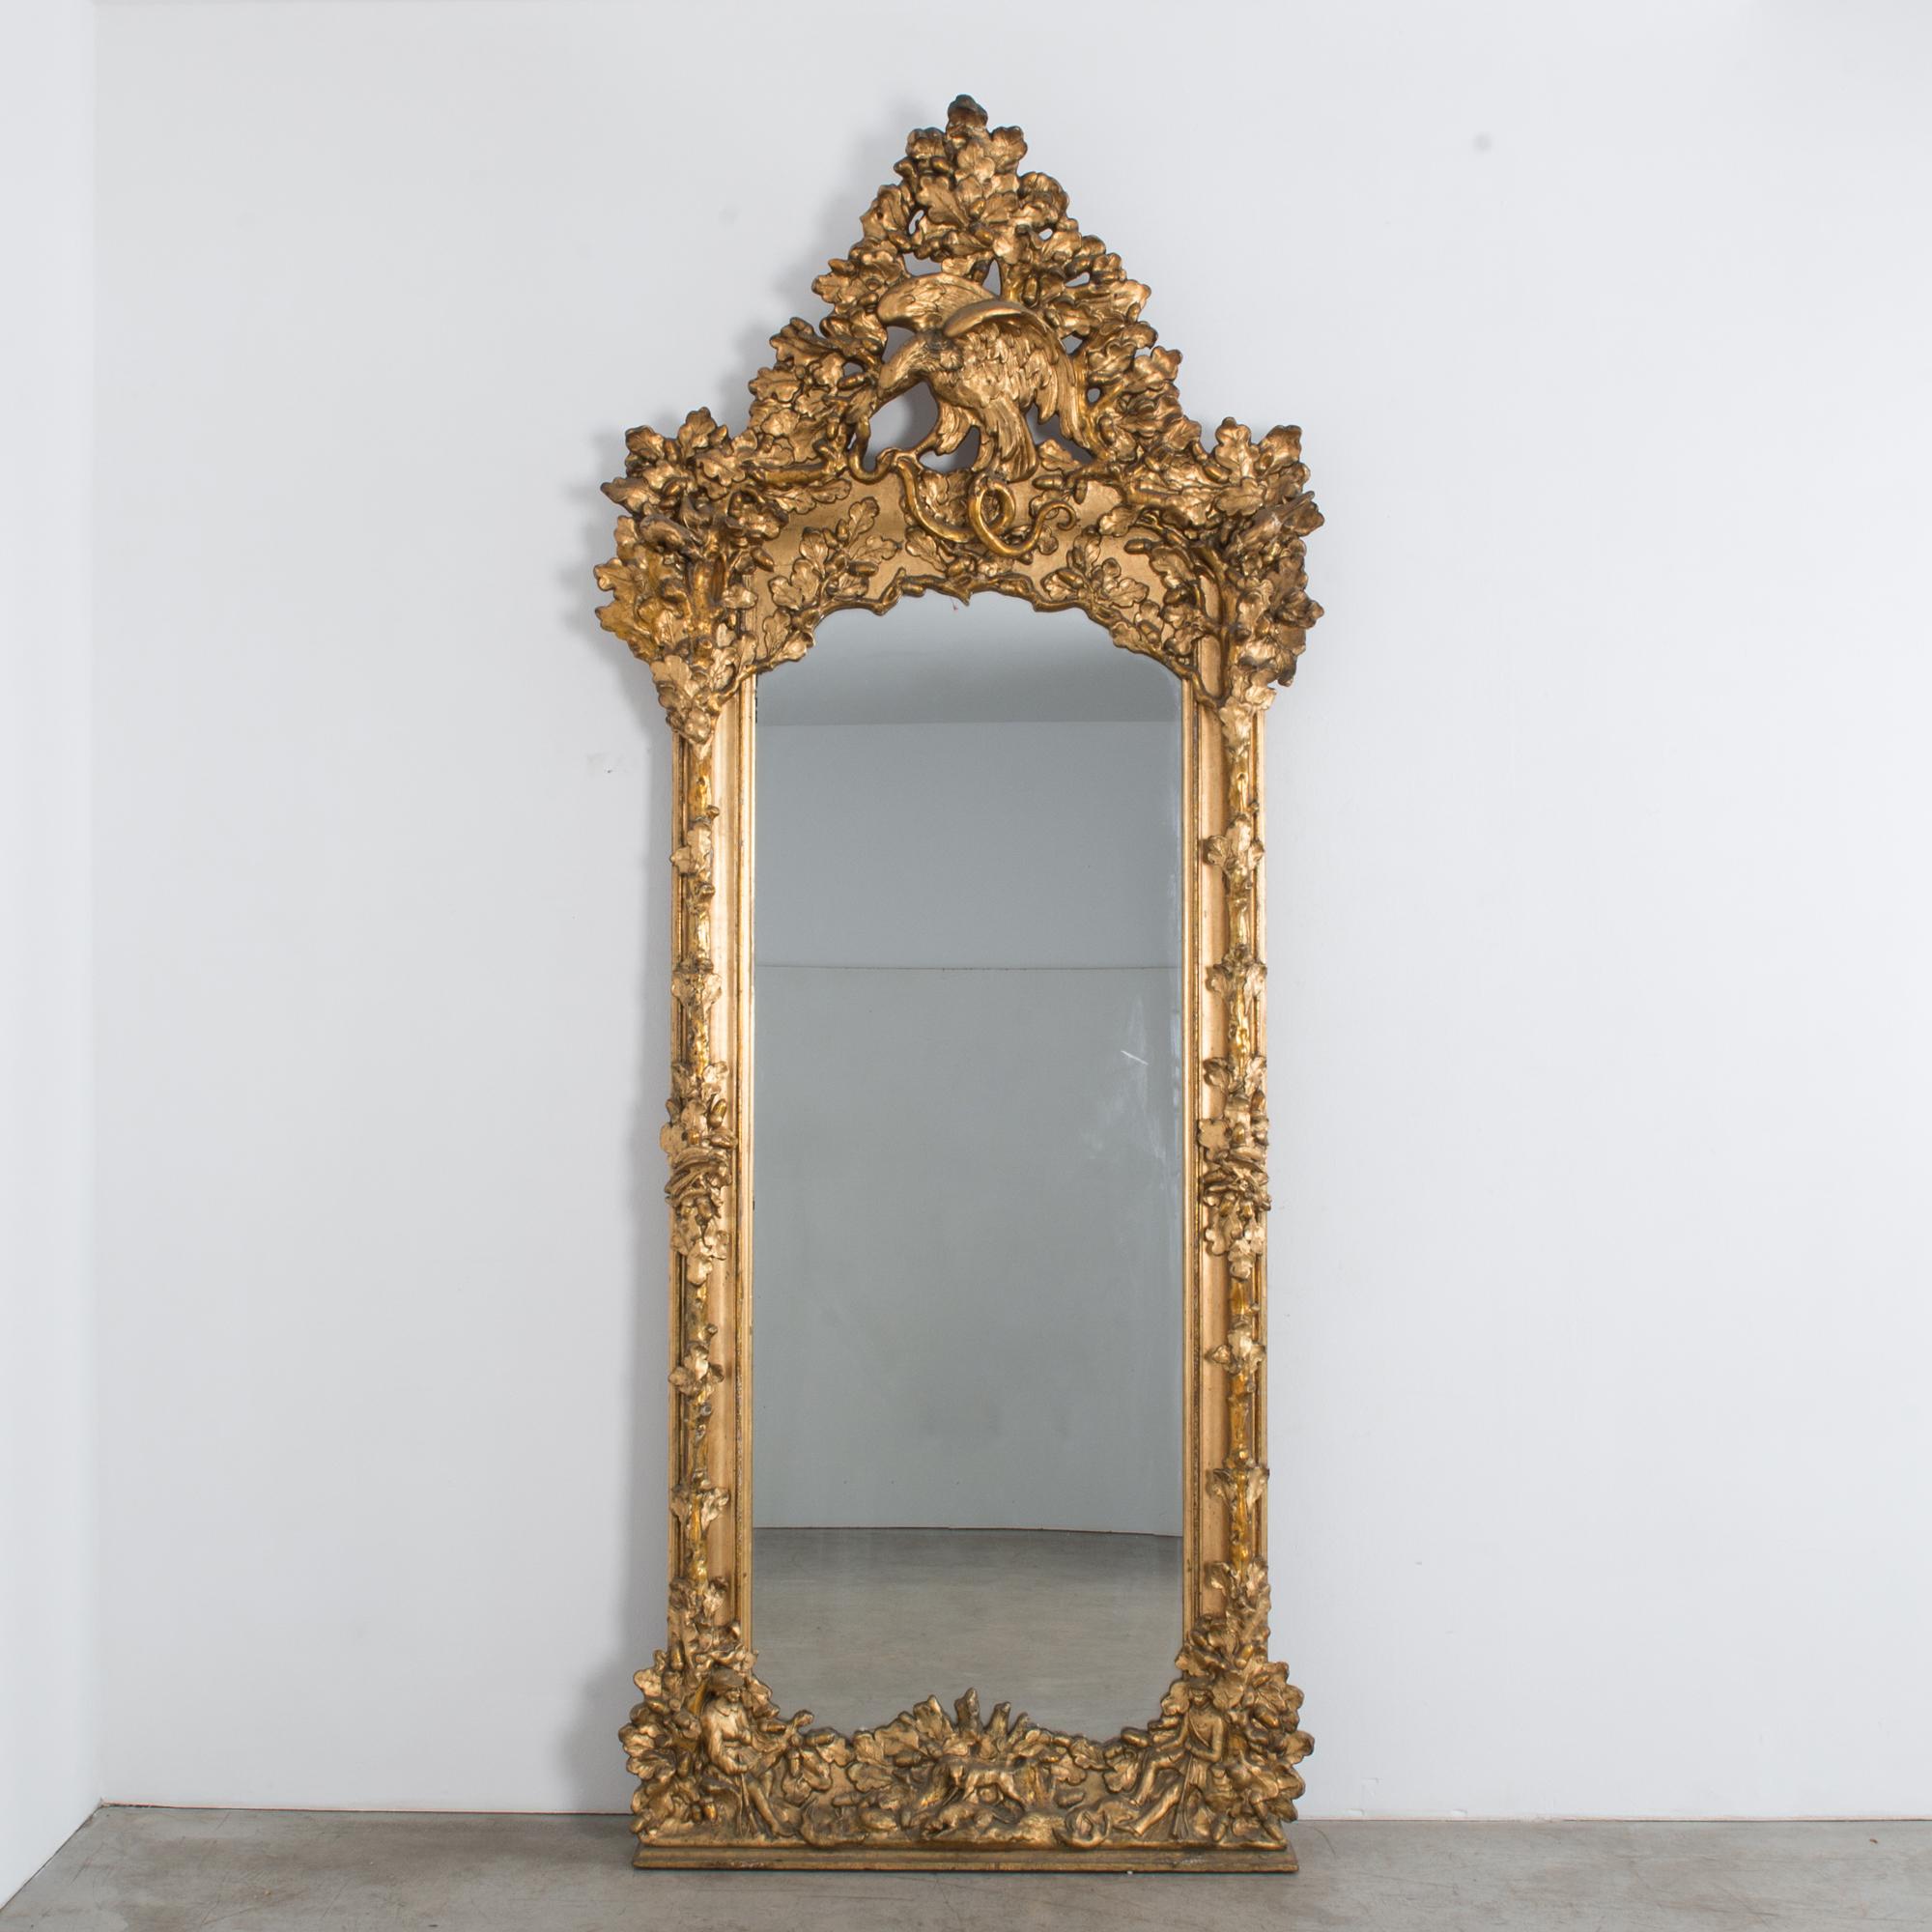 This intricately carved mirror reflects an impressive architectural scale and elaborate imagery, from Austria, circa 1880. Standing over 9 feet tall, this palatial piece will even make an impression in large spaces. A probable family crest, the